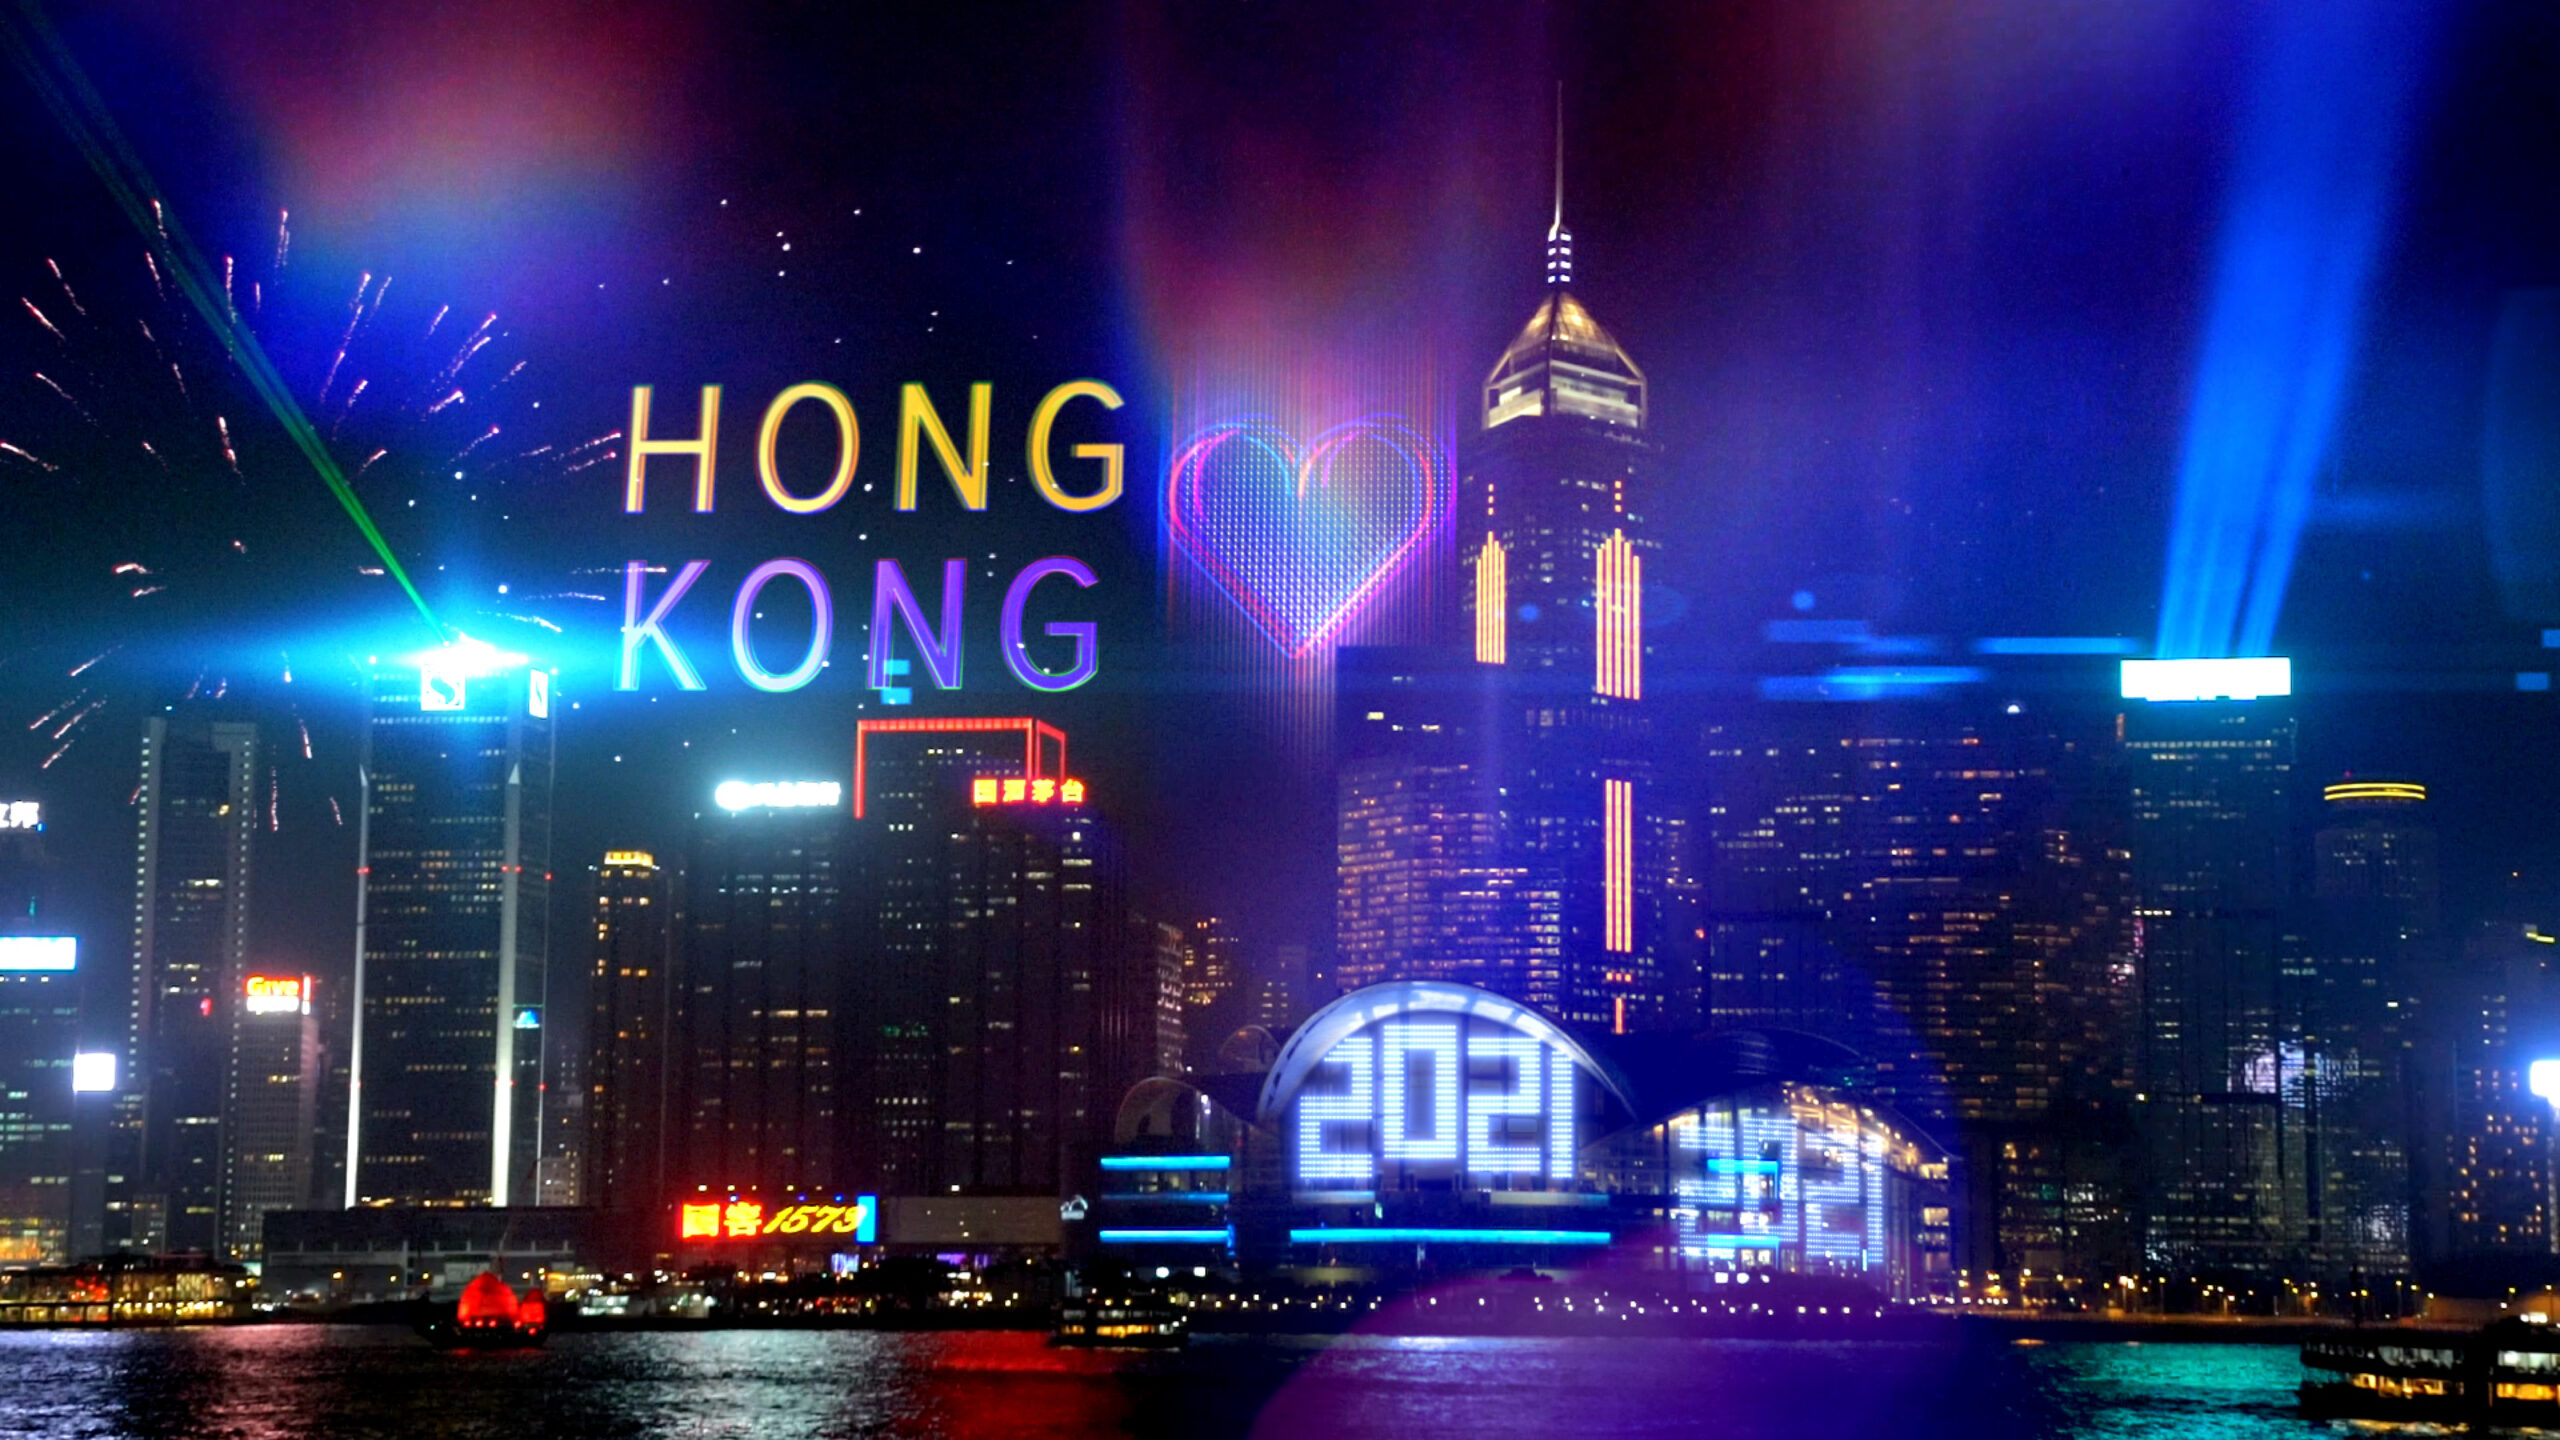 Hong Kong New Year Countdown Celebrations Goes Online For The First Time! - KL Expat Malaysia